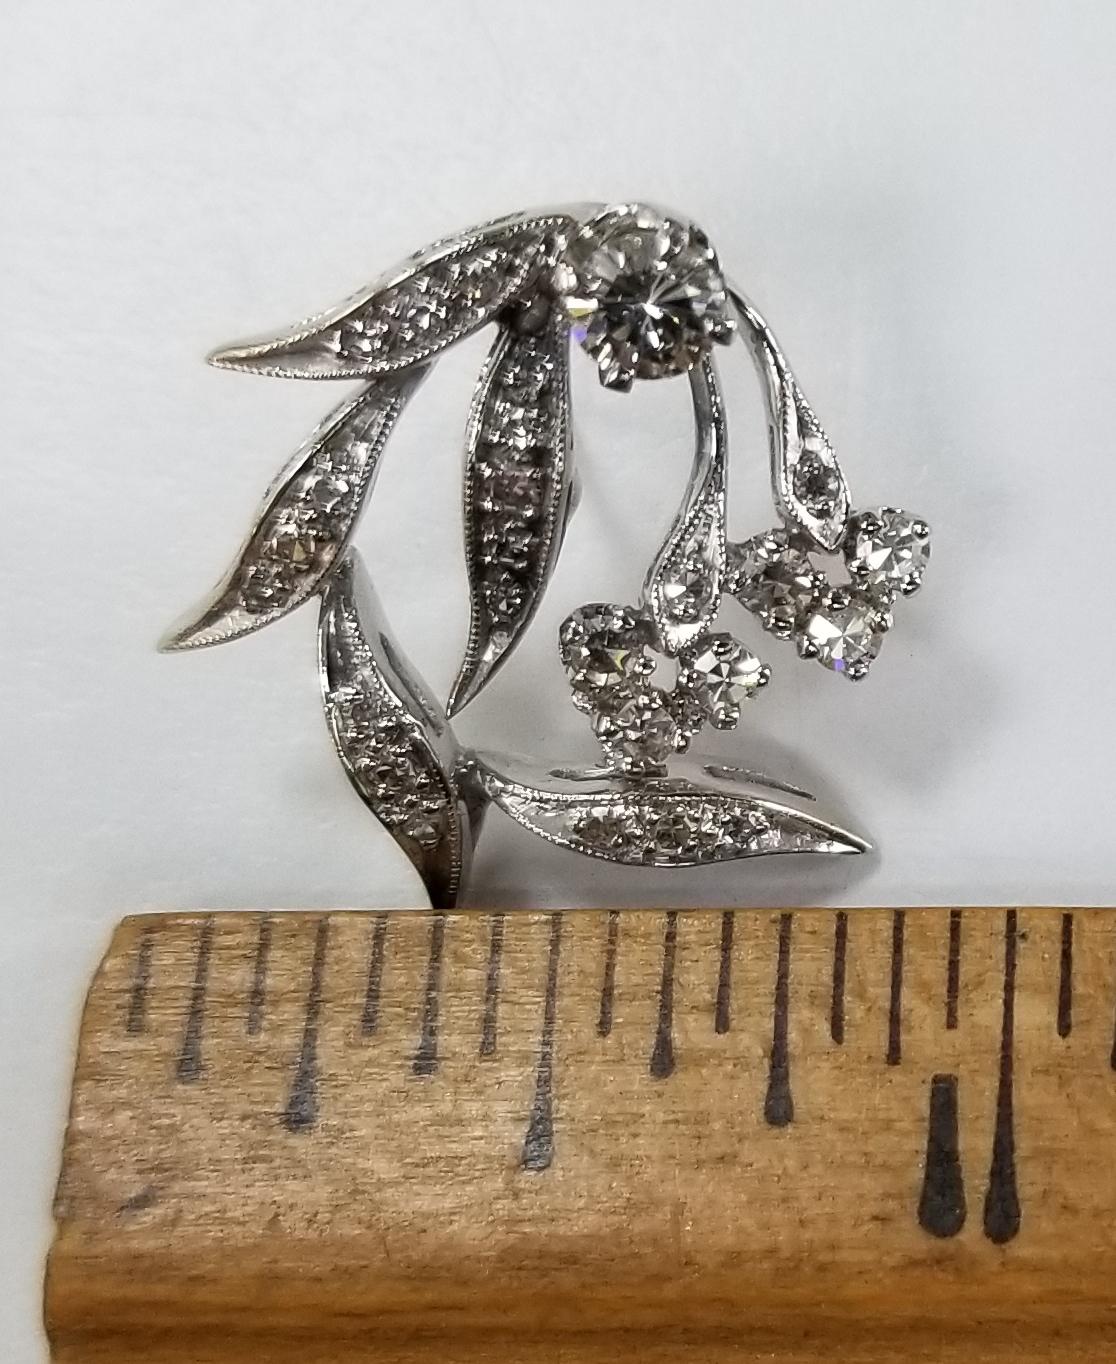 Vintage 14k white gold leaf diamond earrings, containing 54 round diamonds of both single and full cut; color 